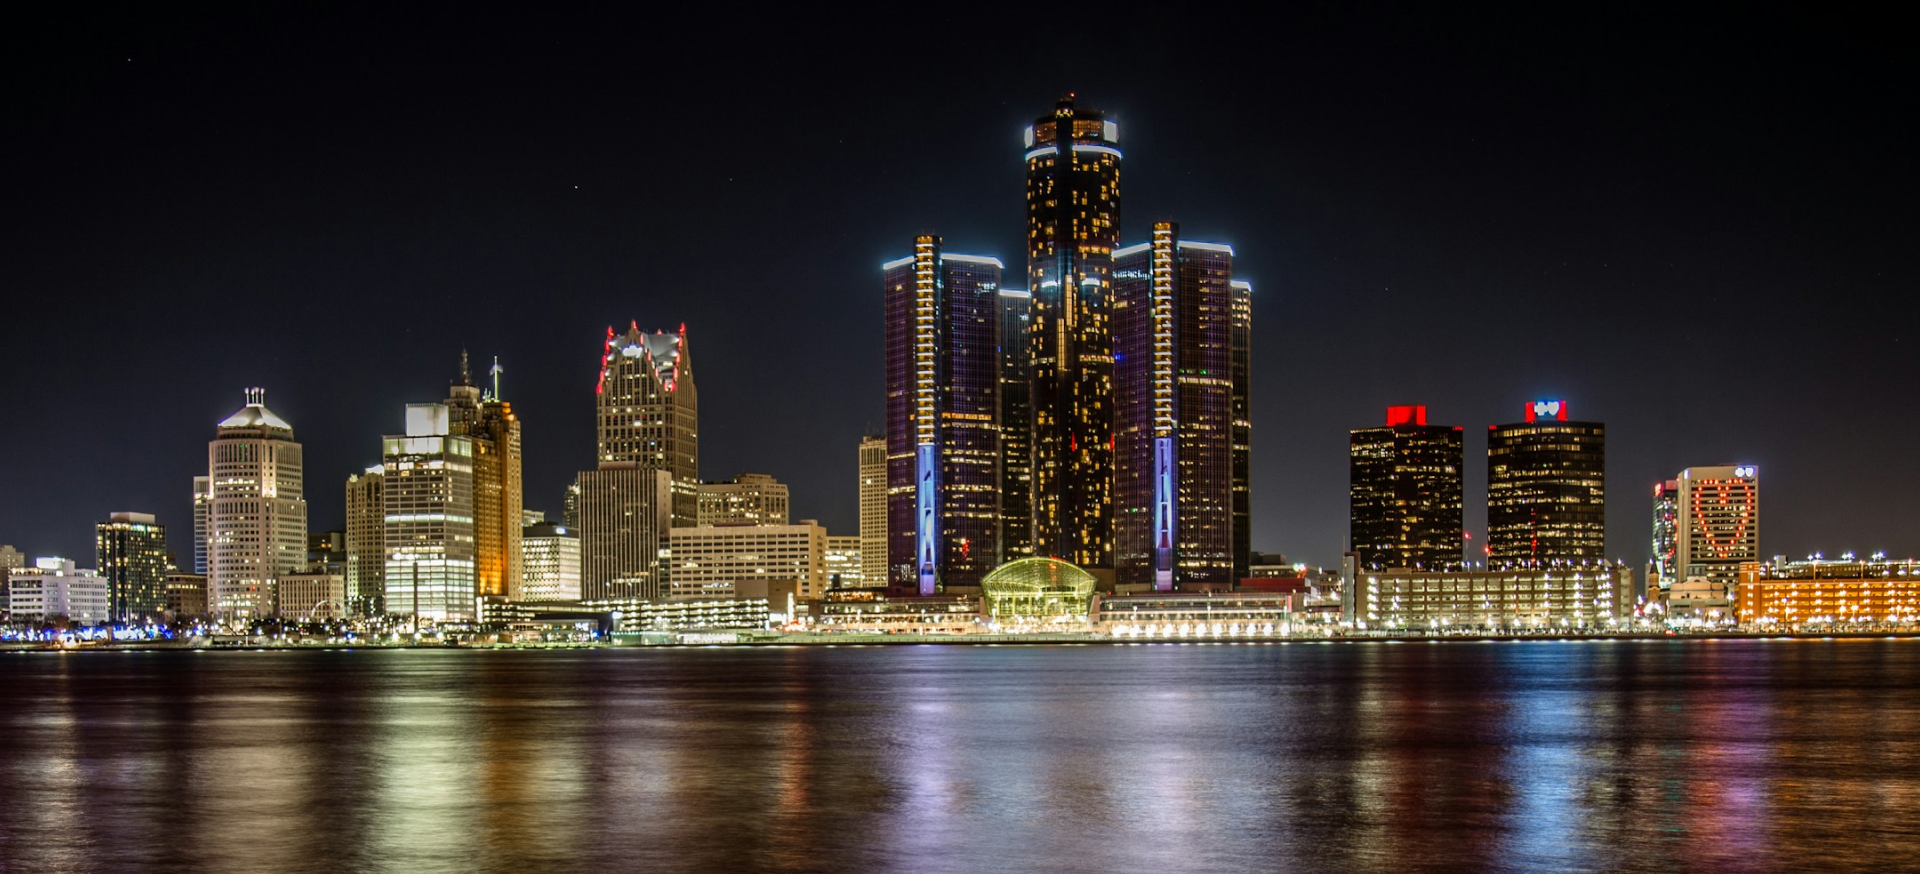 A view of the detroit skyline at night.